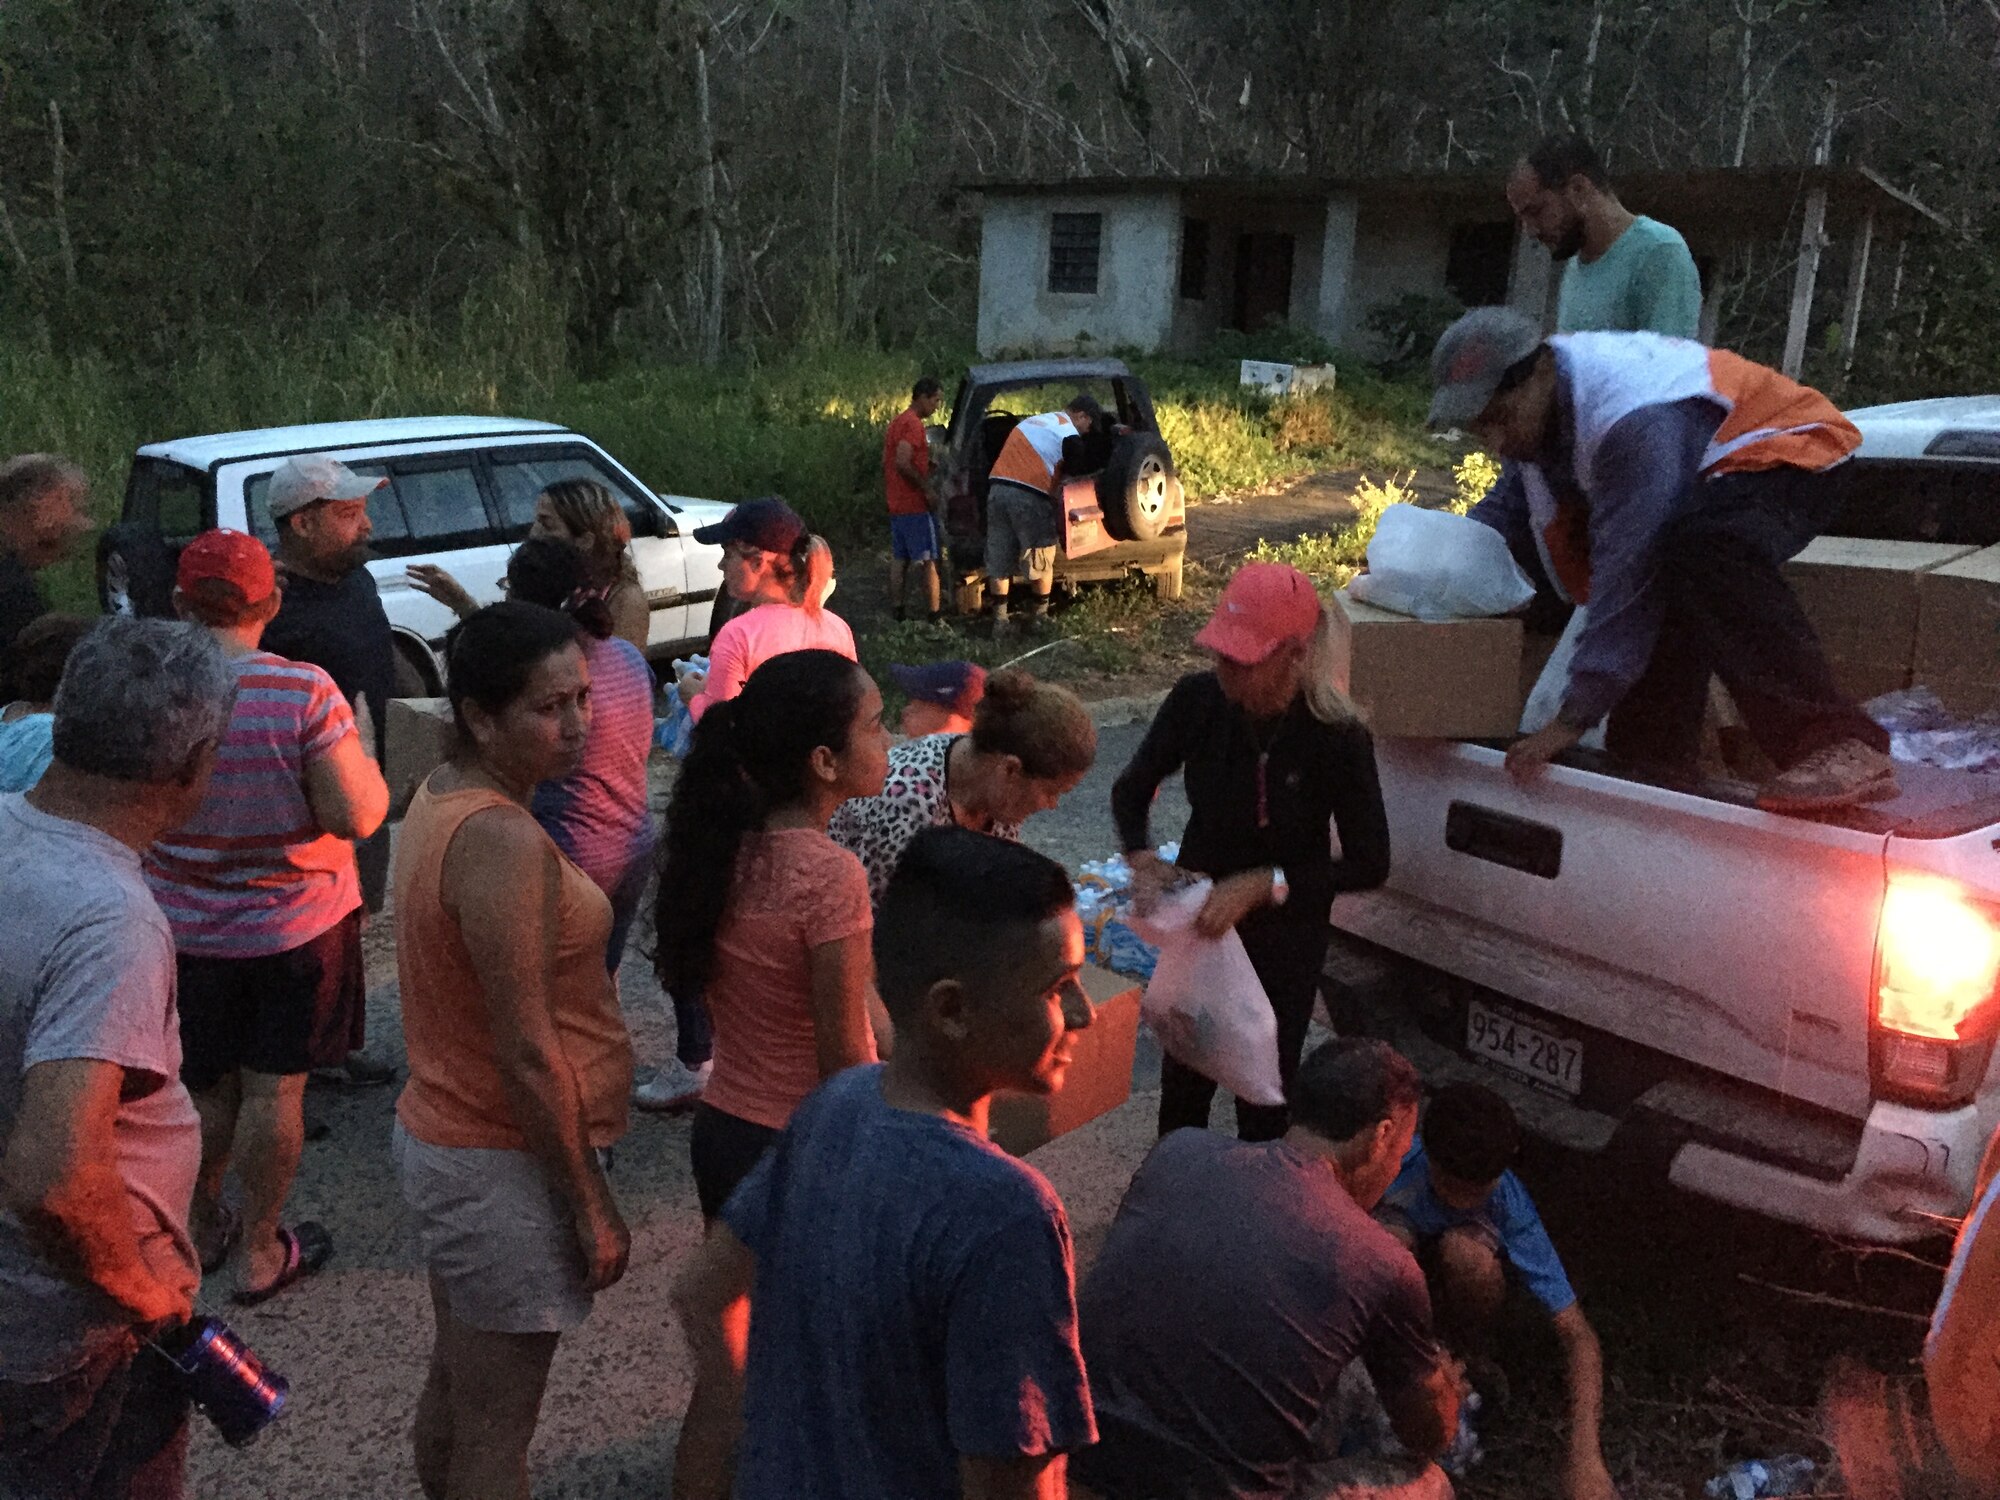 UTUADO, Puerto Rico – Richard Dessert, a Washington Air National Guard master sergeant, unloads emergency kits to residents in the remote mountain areas around Utuado Oct. 5, 2017.  Dessert volunteered to deploy in support of his civilian employer, World Vision, to provide Hurricane Maria relief and IT support.  (Courtesy photo by Richard Dessert)